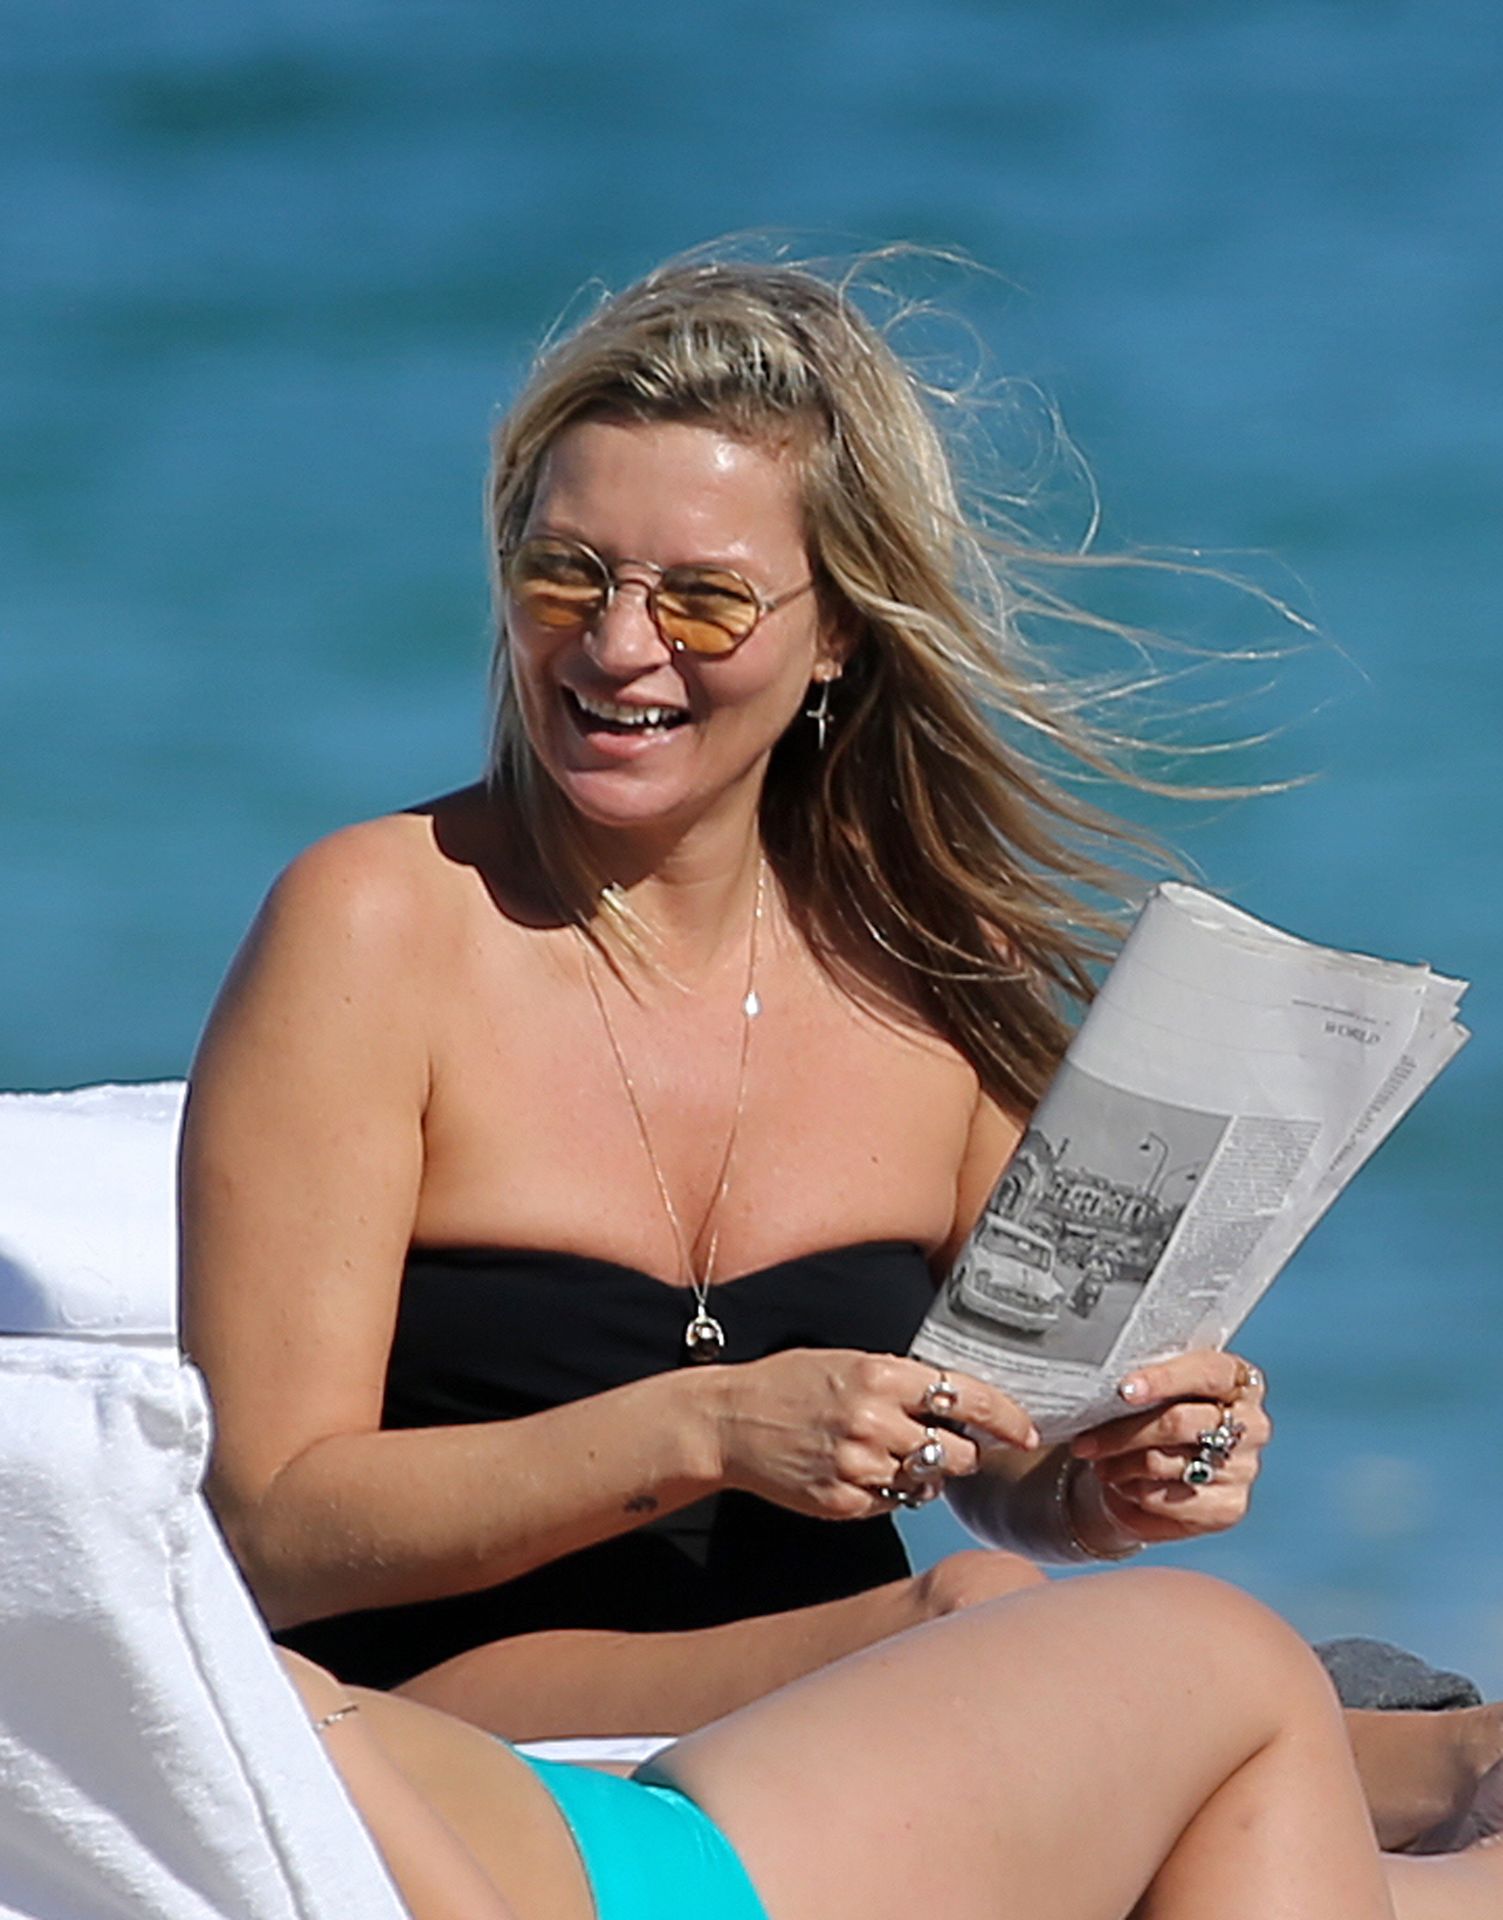 Leaked kate moss caught topless during beach photoshoot